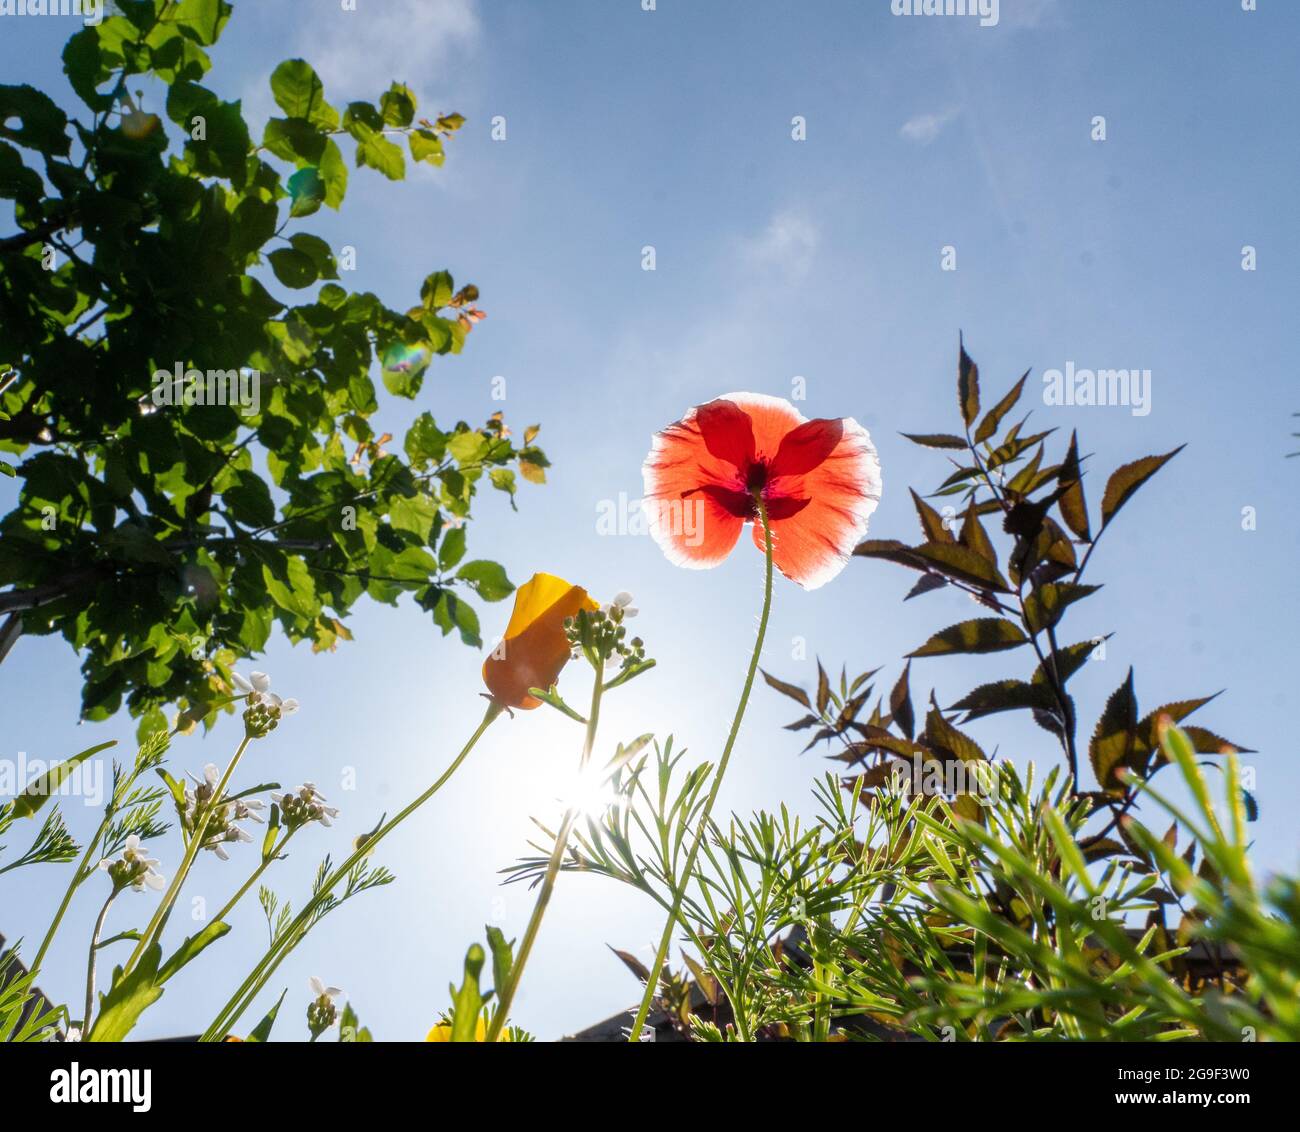 Wildflower Patch with colourful flowers in Garden taken on a sunny day taken from below showing blue sky Stock Photo